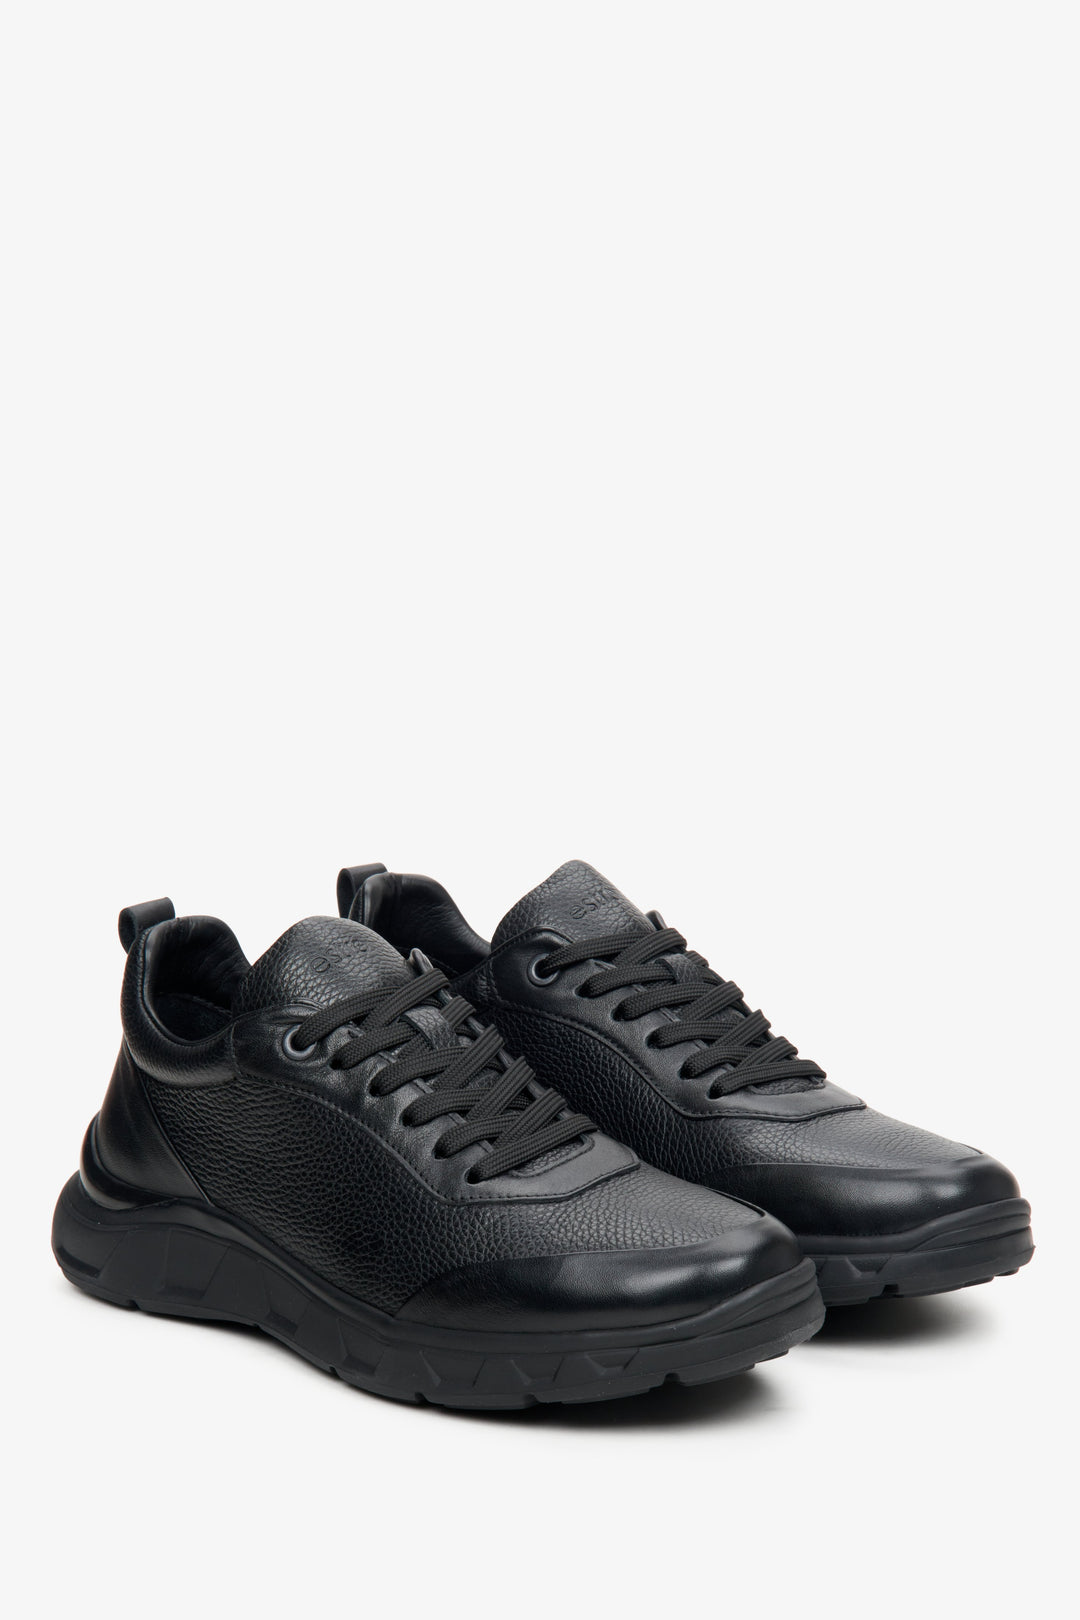 Men's black sneakers made of textured genuine leather by Estro.